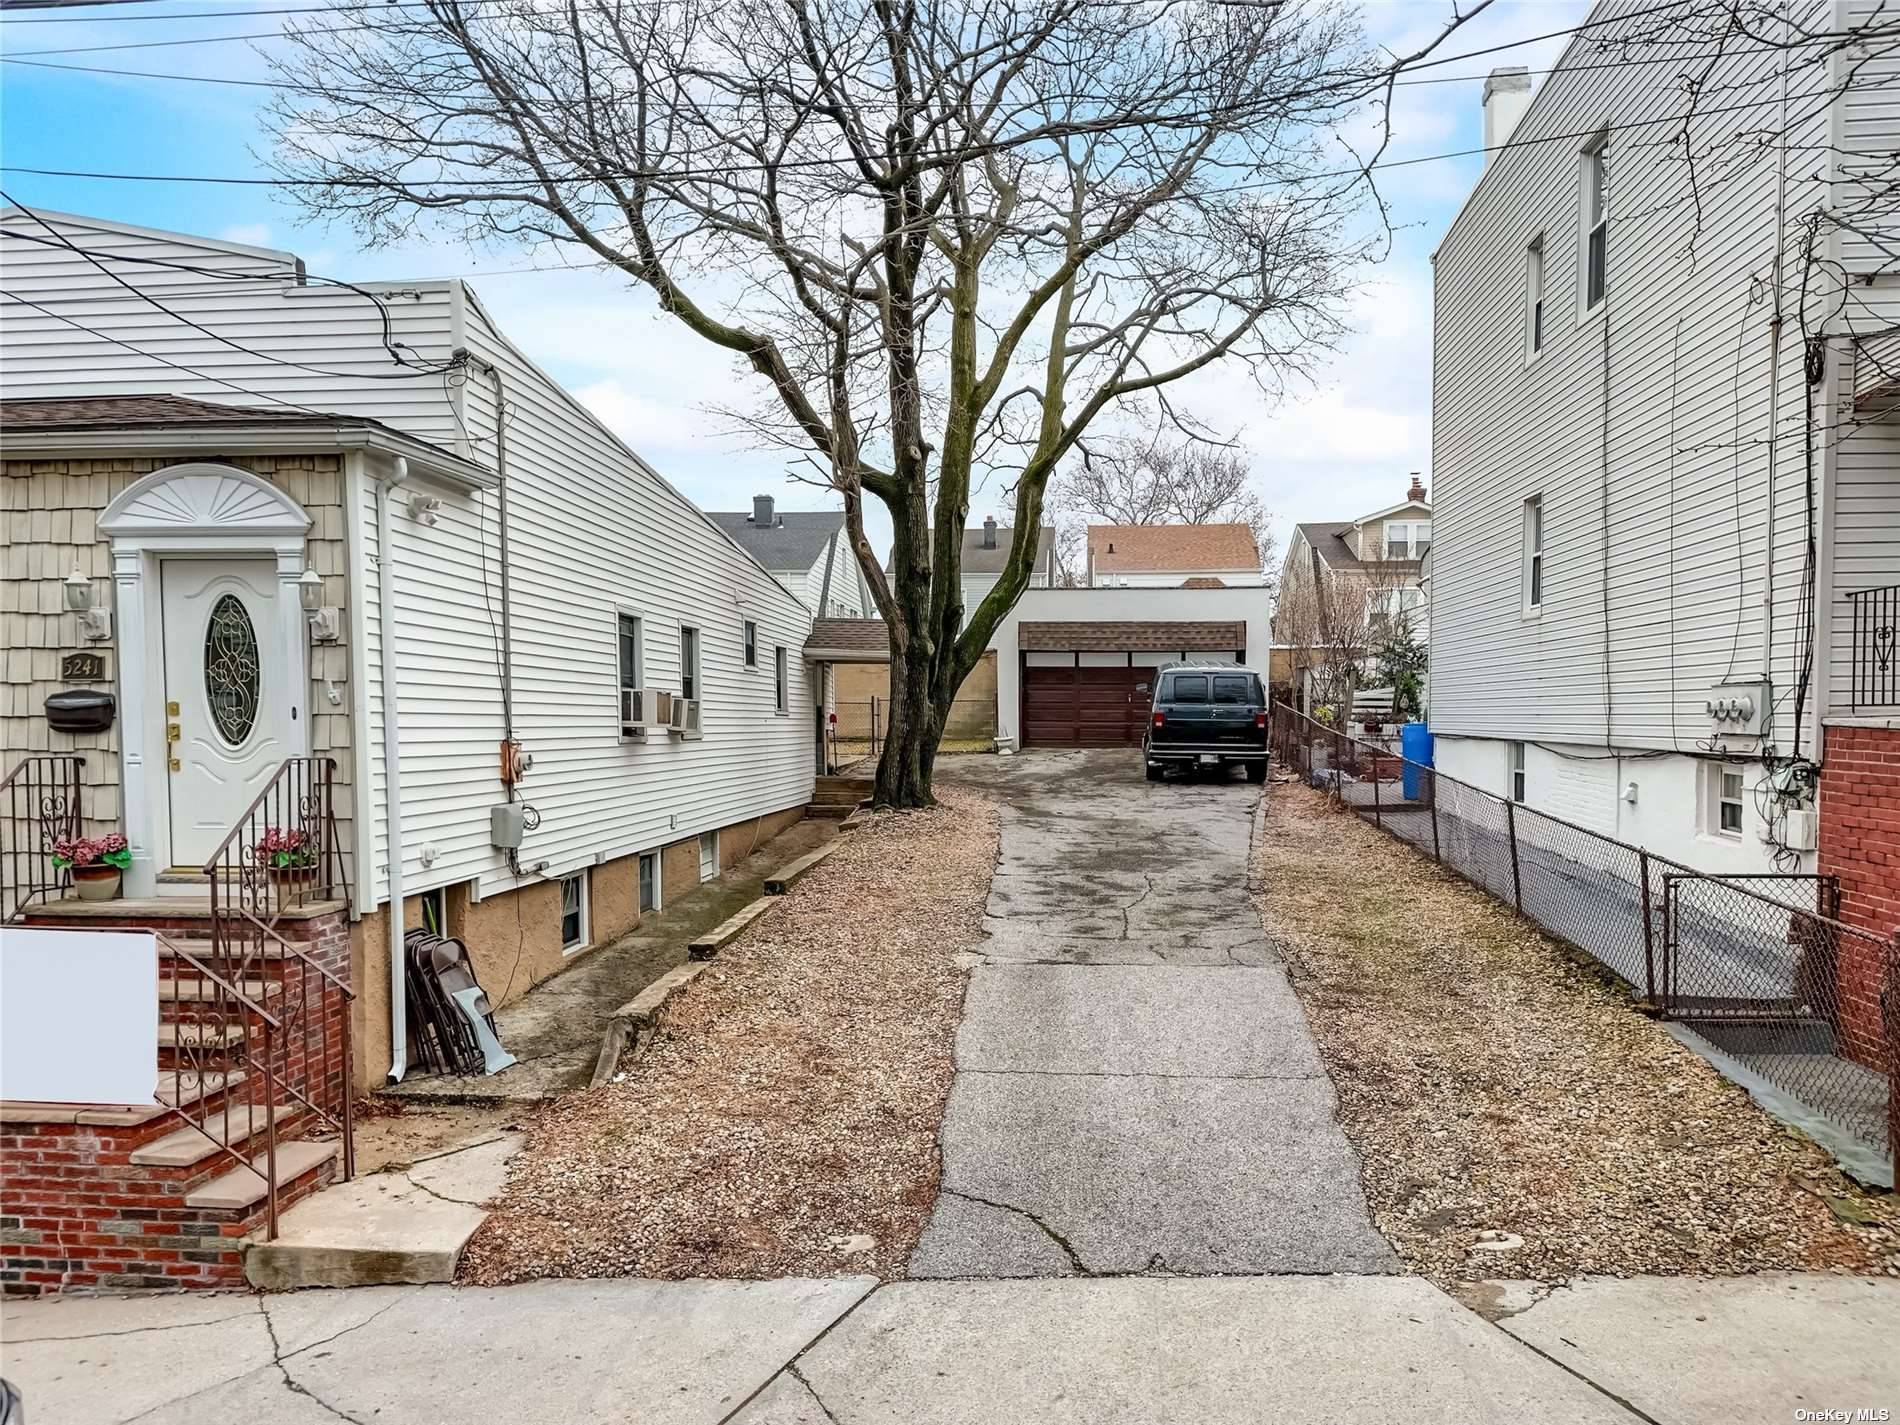 Attention buyers and builders seeking a prime opportunity for development, consider these two lots located at 52 41 and 52 43 72nd Place, Flushing, NY 11378.